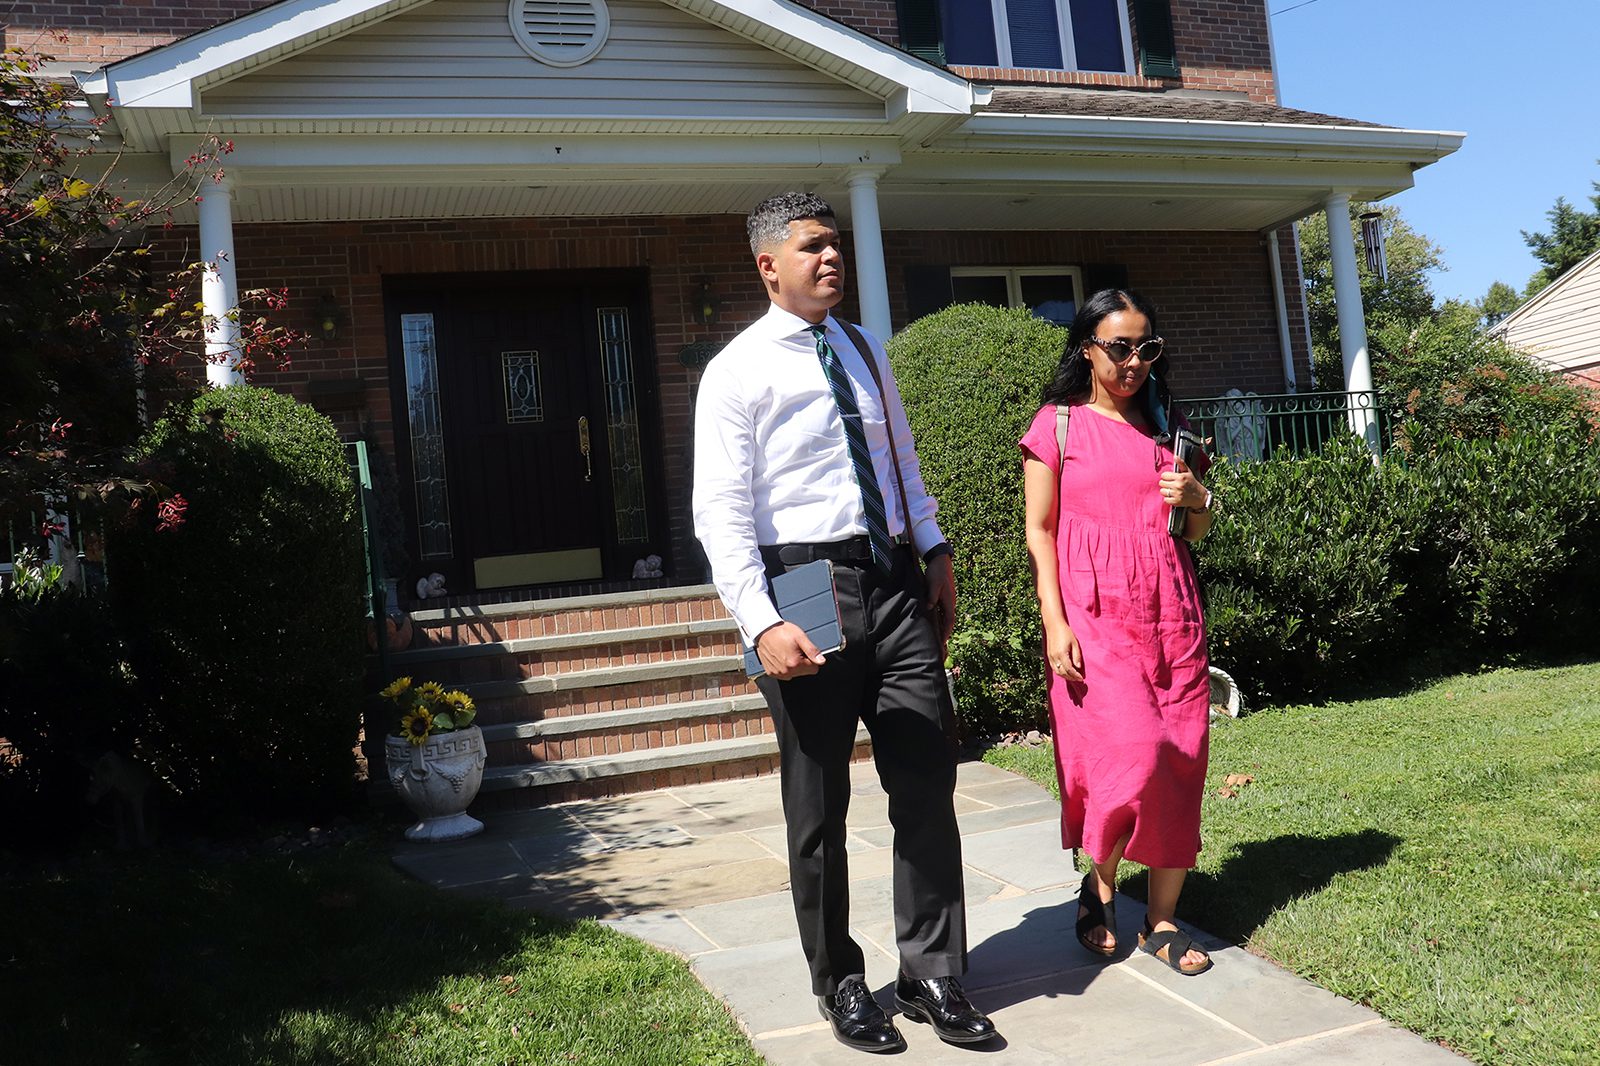 Chris and Aisha Sees, of Takoma Park, Maryland, leave a home while door knocking in Silver Spring on Thursday, Sept. 1, 2022. Jehovah’s Witnesses returned to the traditional practice of door knocking after a lengthy pause due to the pandemic. RNS photo by Adelle M. Banks